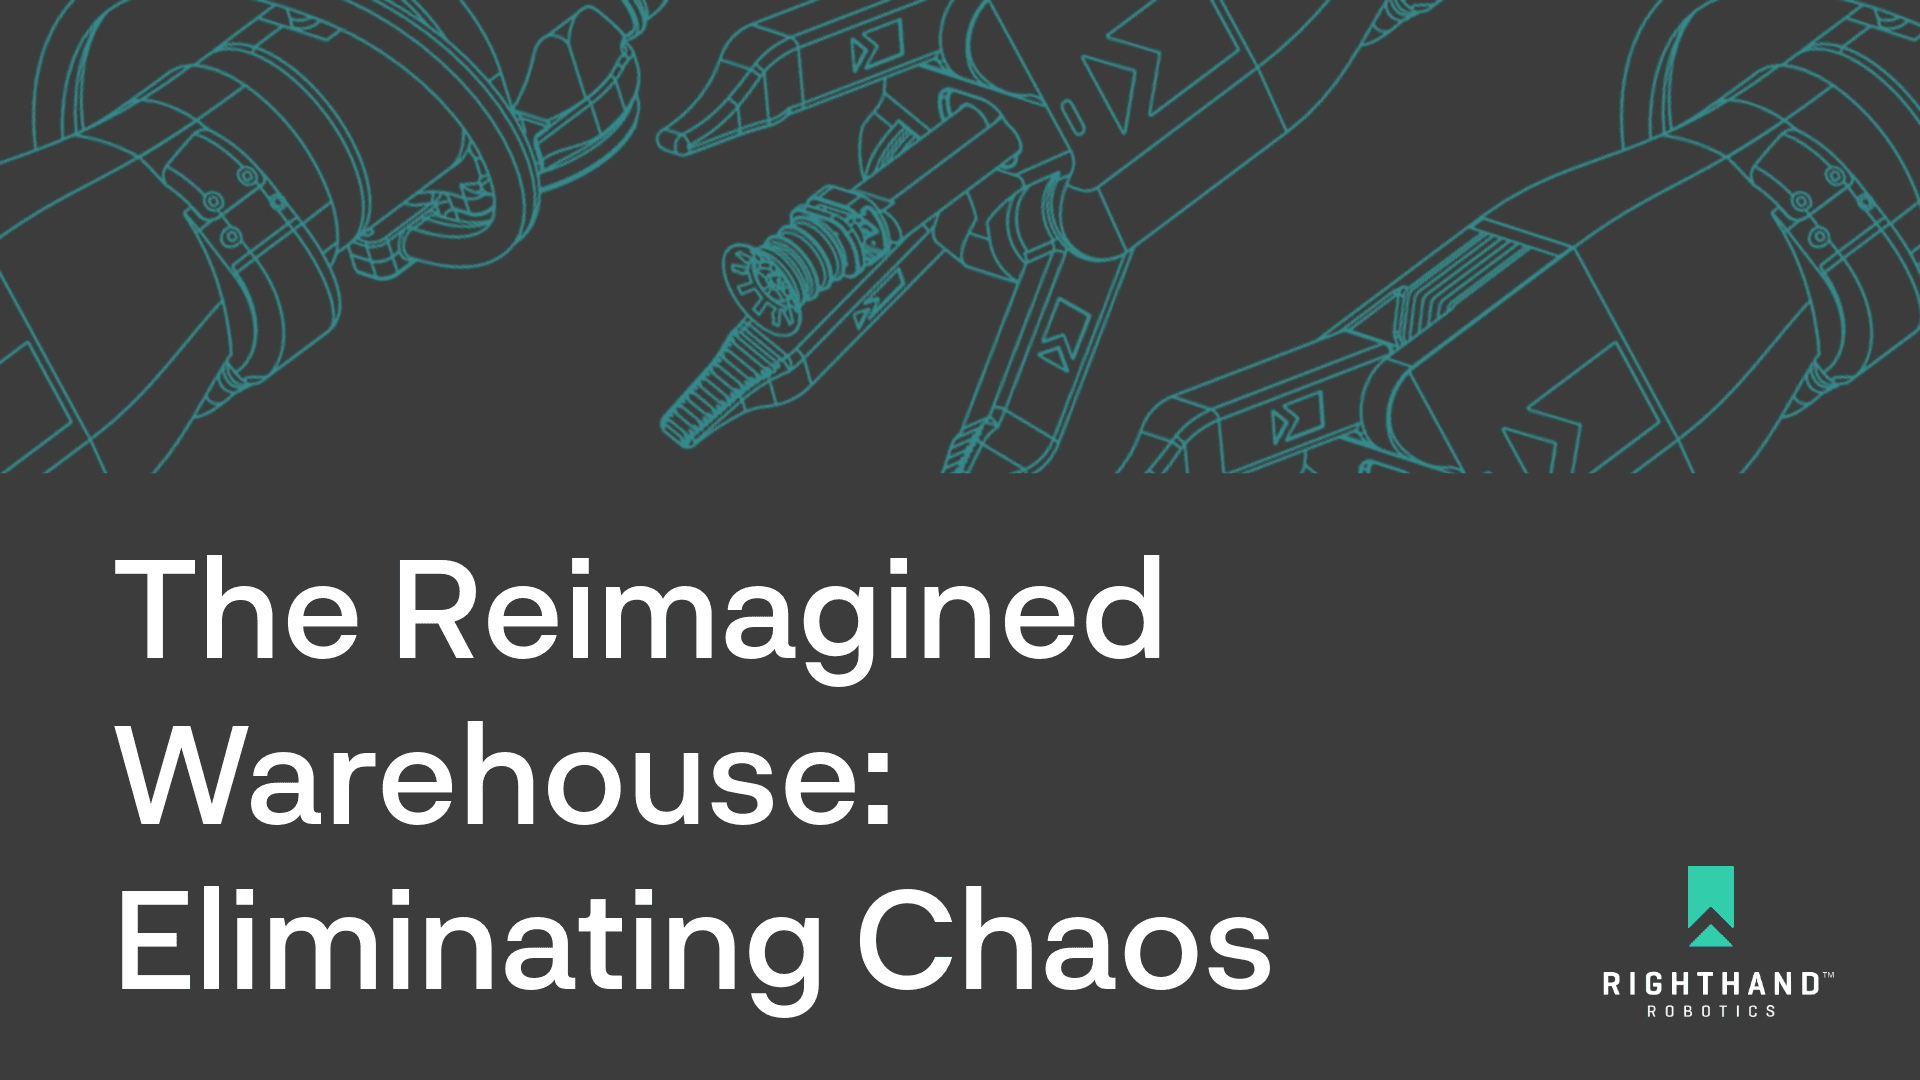 The Latest Article: The reimagined warehouse: eliminating chaos